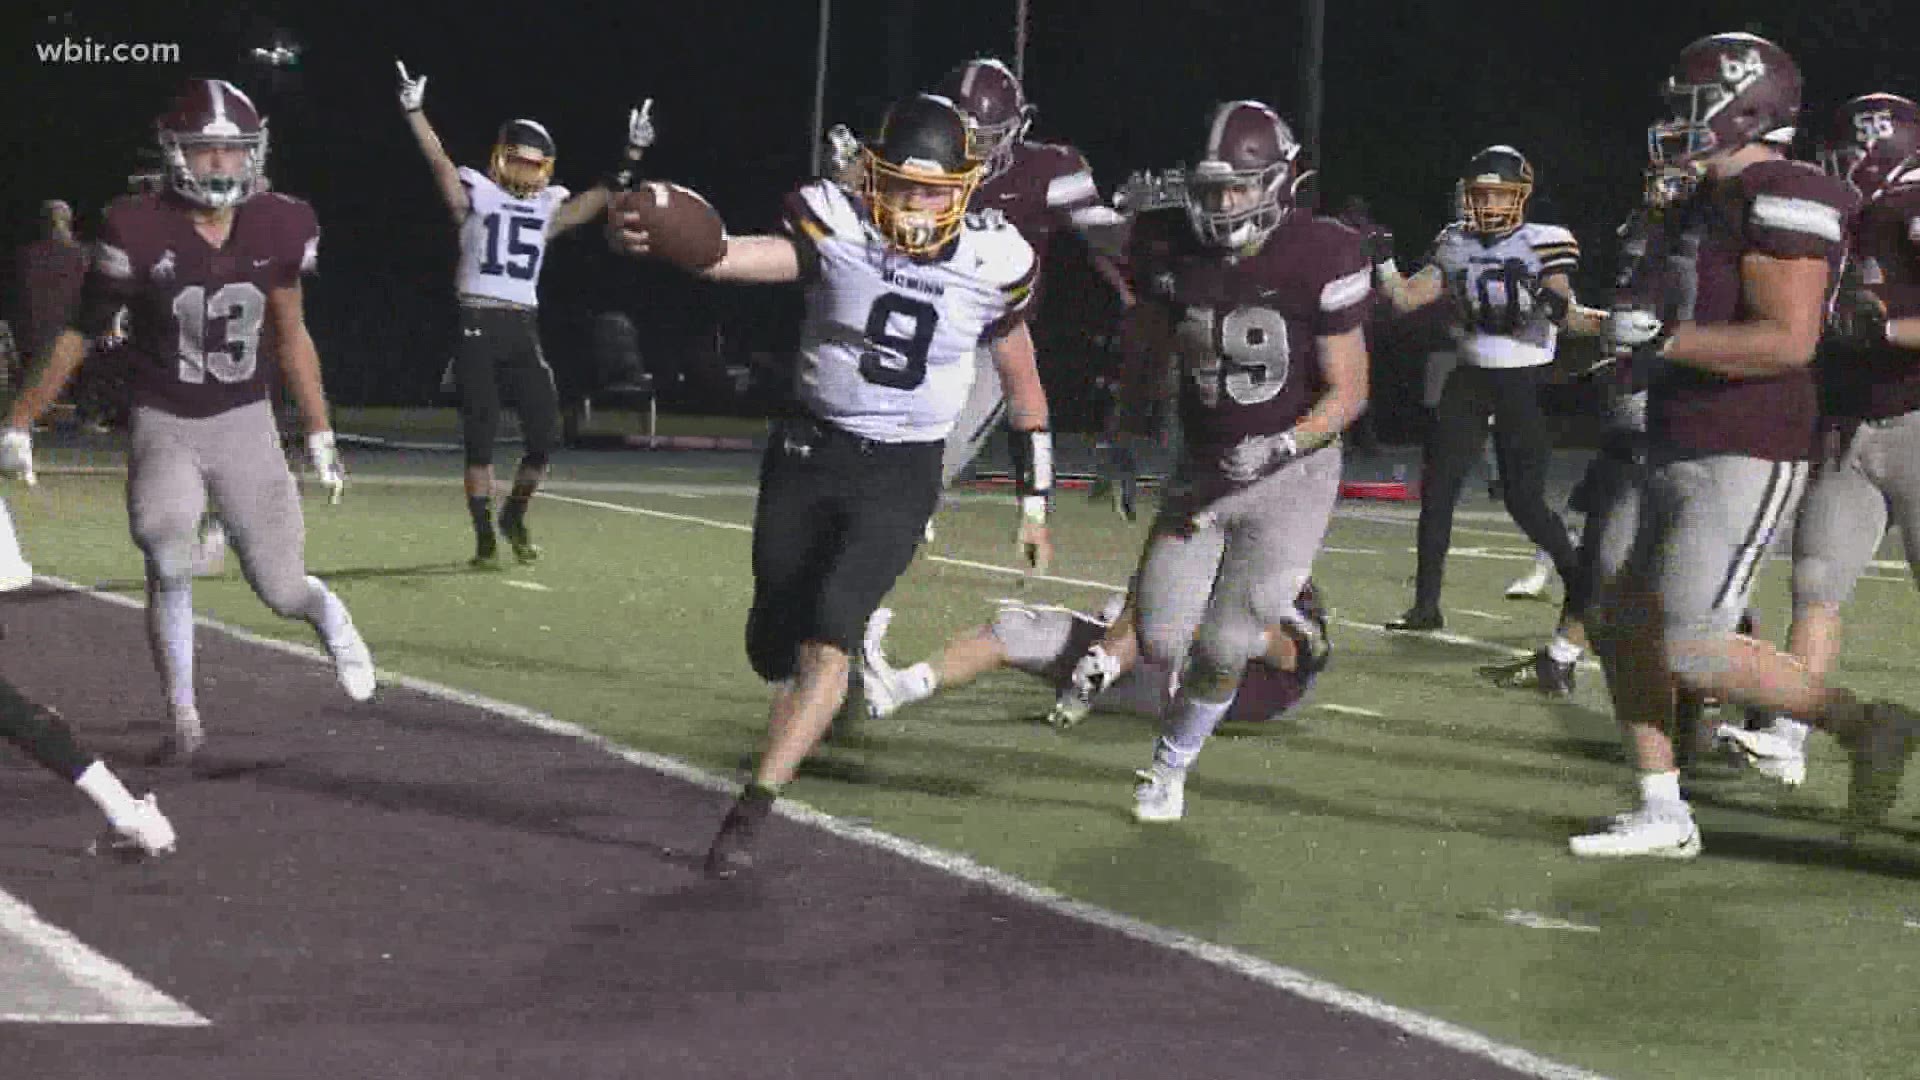 McMinn County picks up its third shutout-win of the season, beating Bearden on the road.